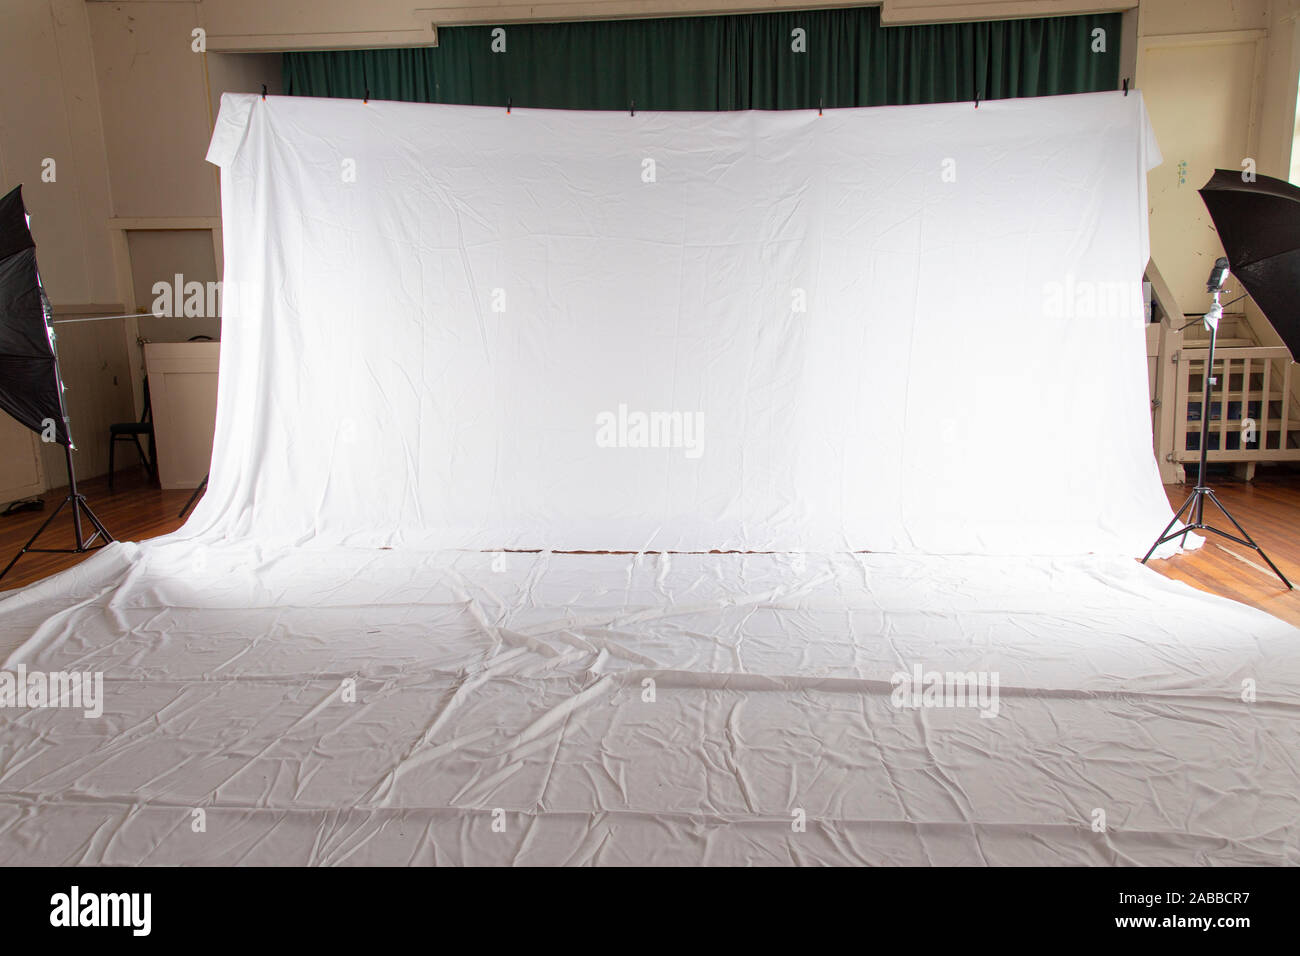 Pull back of set up for professional photography shoot. Volume portrait session. White muslin backdrop 6 metres wide by 3 meters long. Floor covered Stock Photo